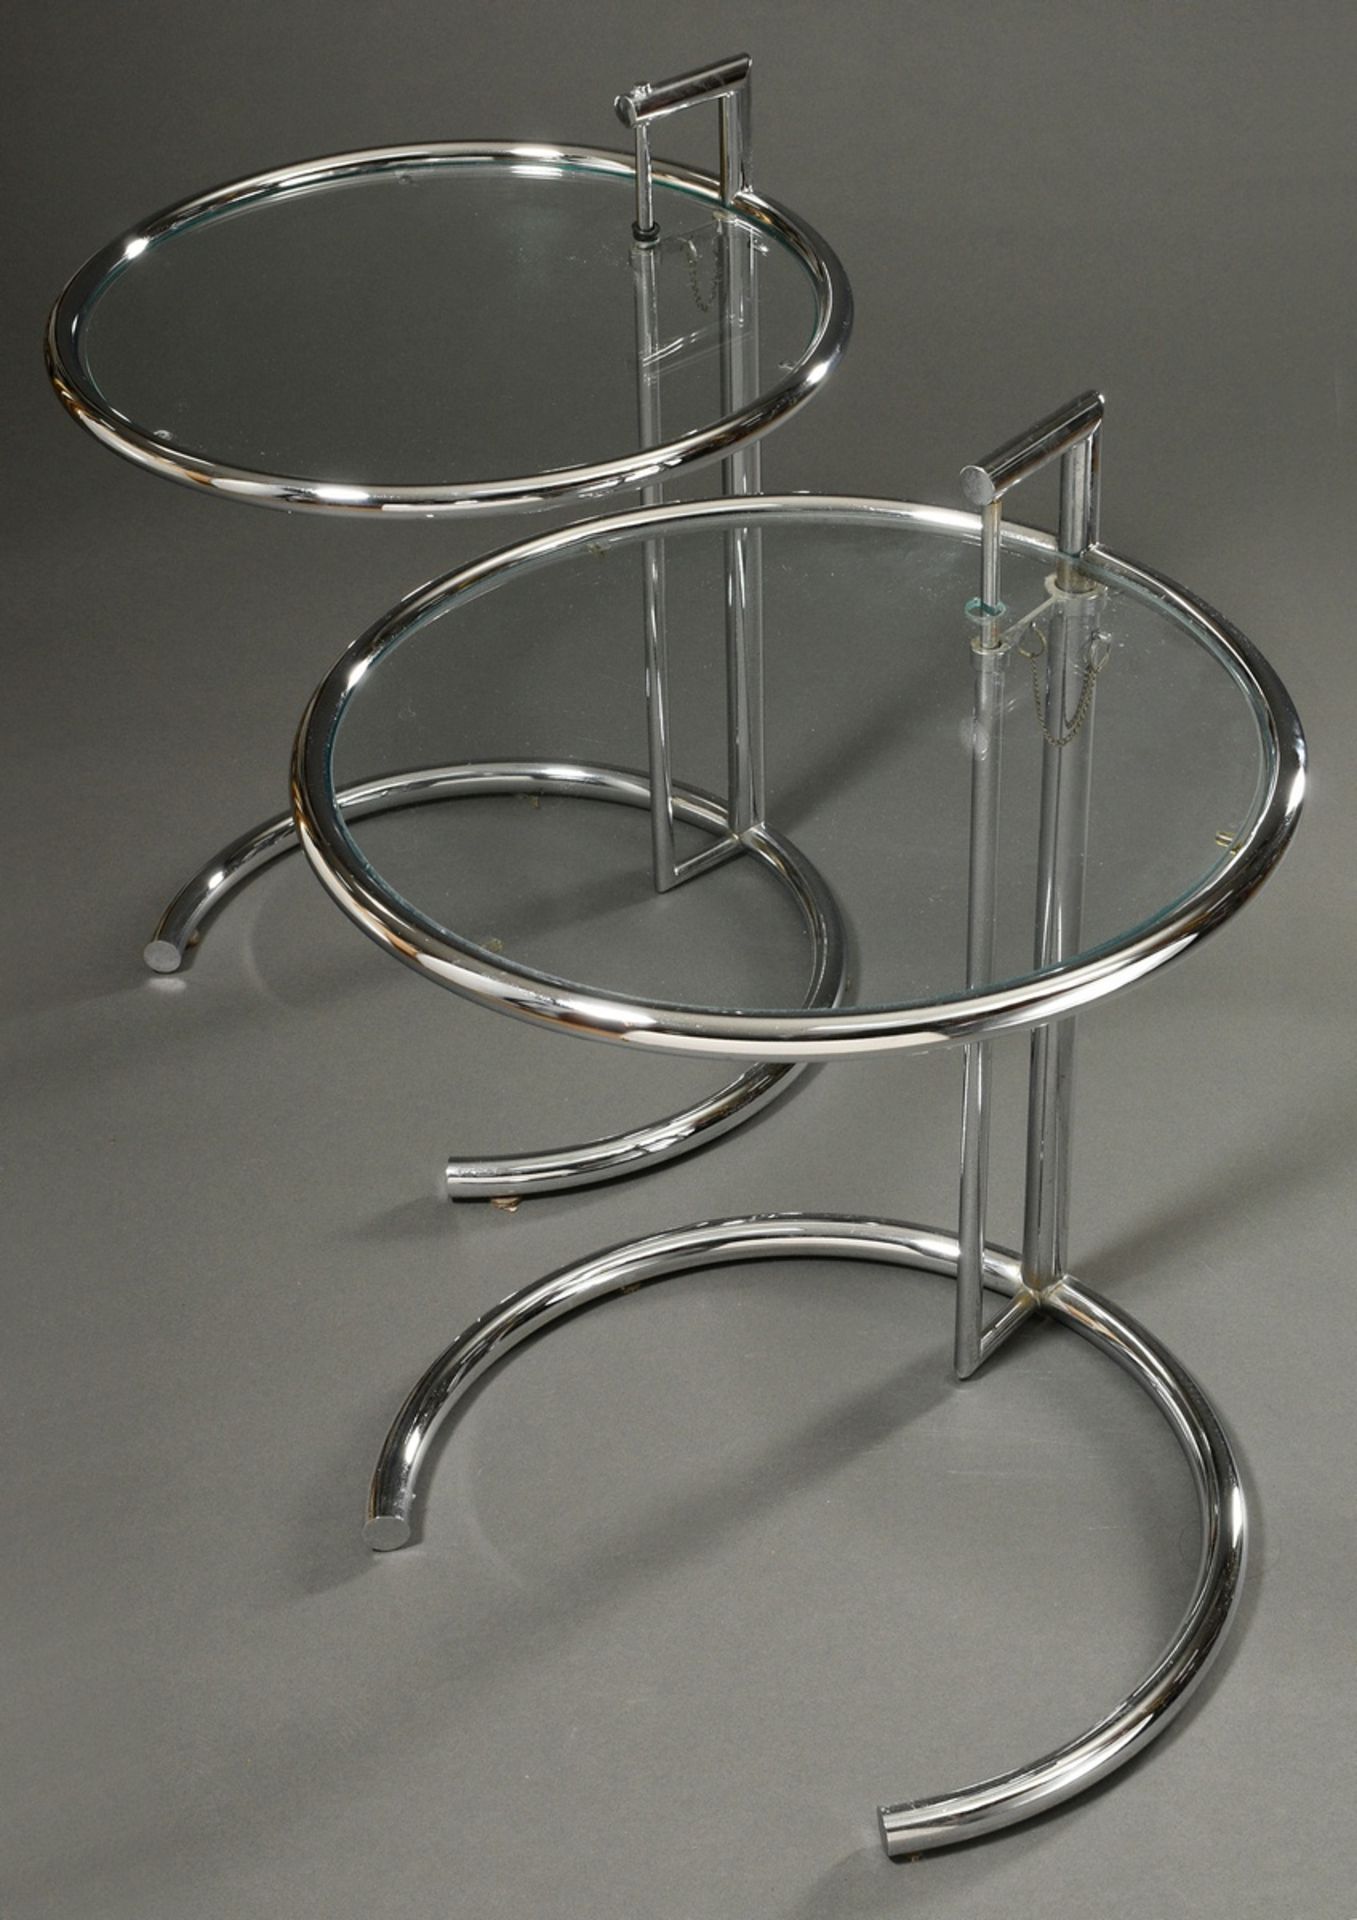 Pair of side tables "E 1027", design by Eileen Gray in 1925, tubular steel and glass, height-adjust